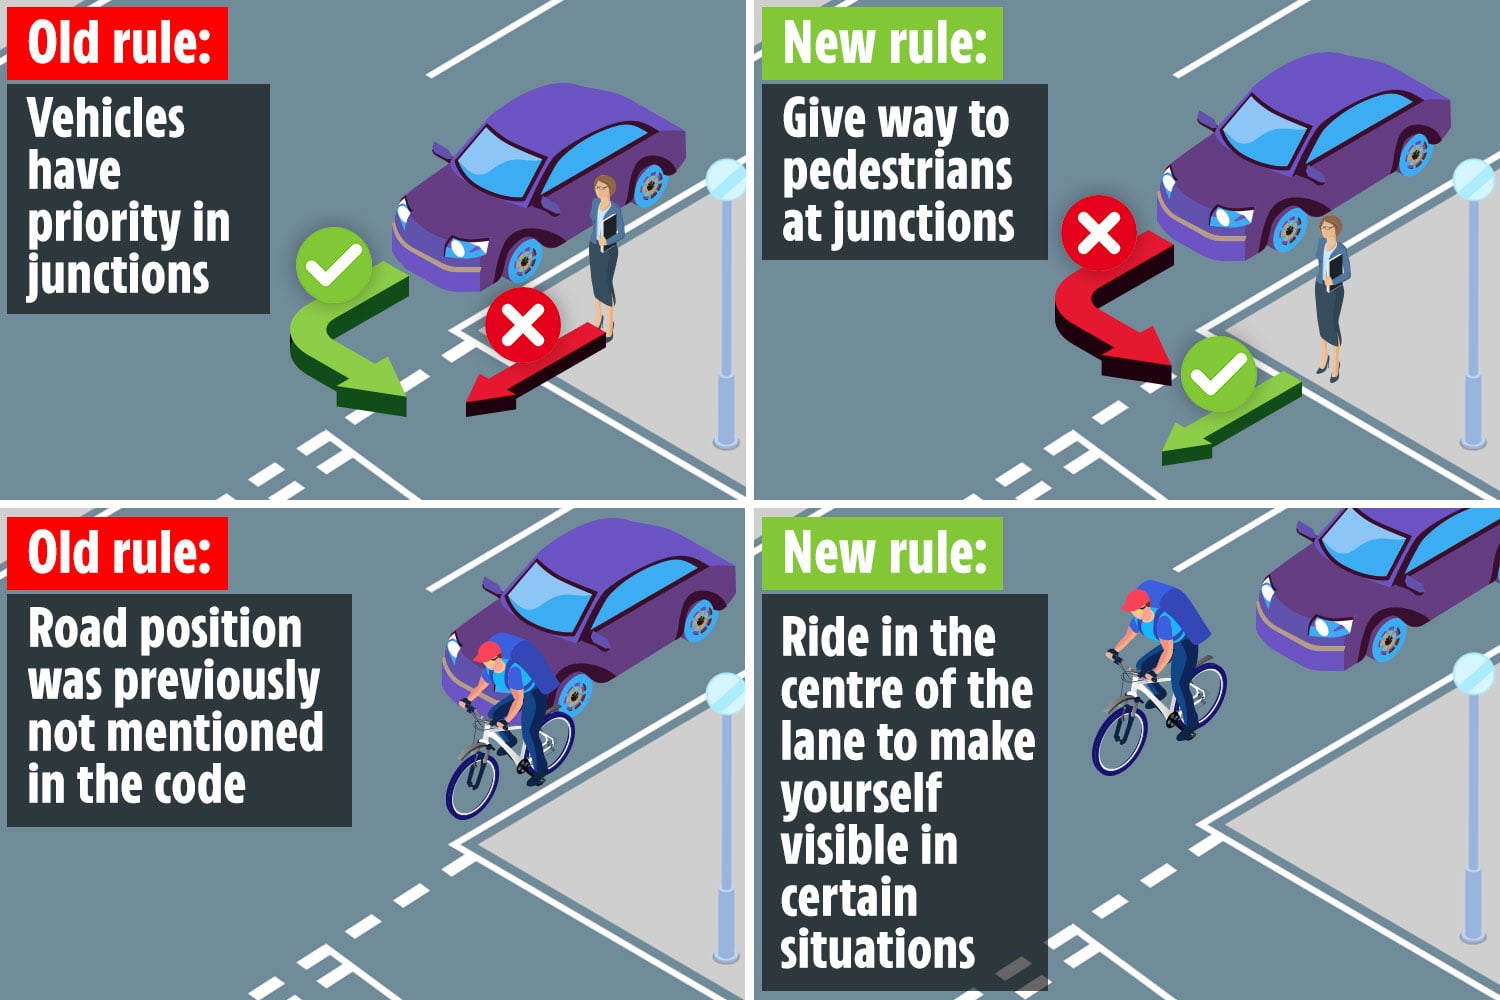 These changes to the Highway Code will come into effect on January 29.